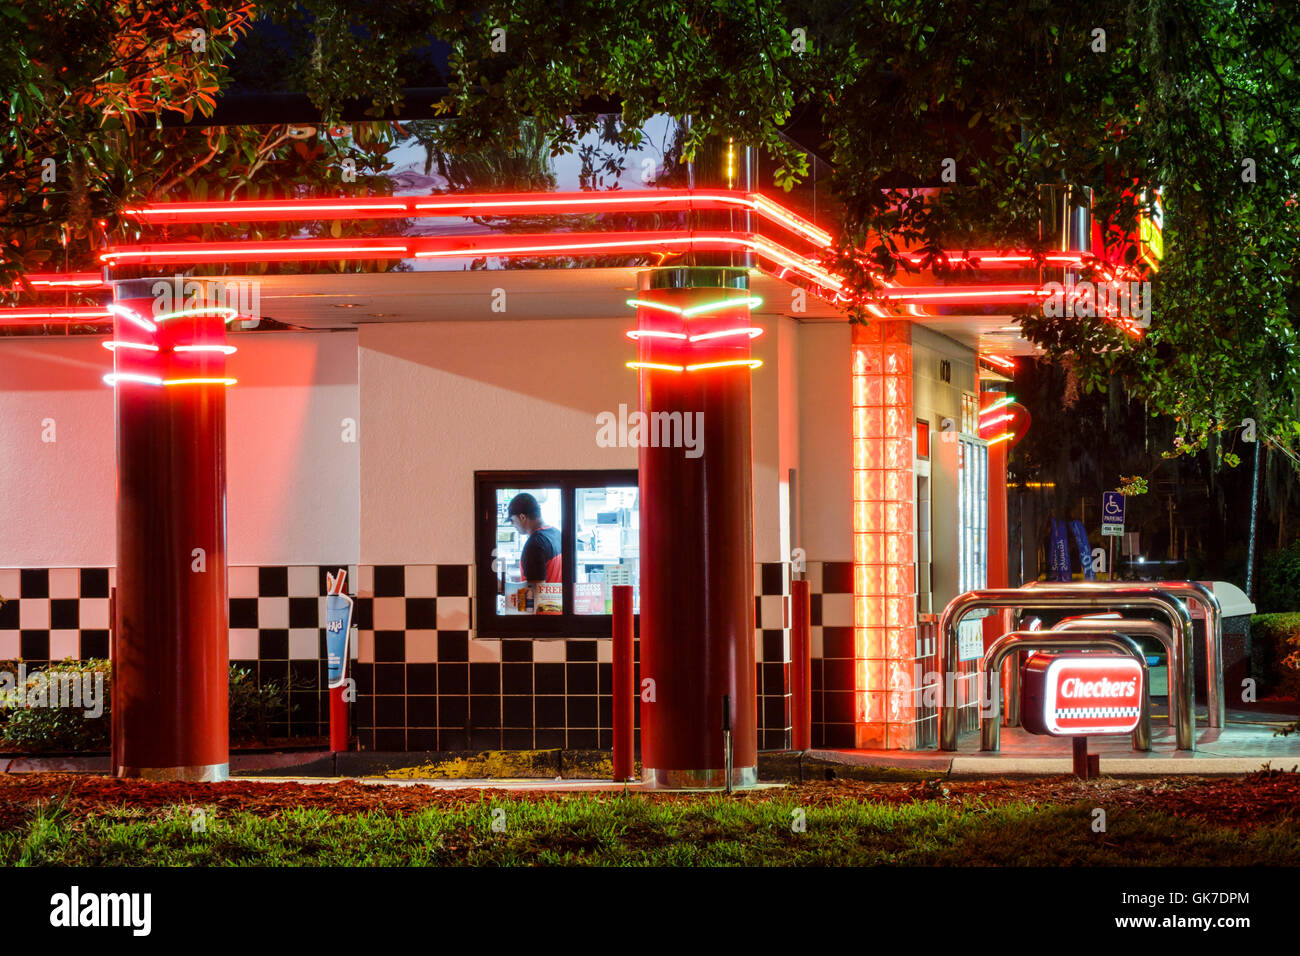 Florida Ellenton,Checkers,hamburgers,fast food,restaurant restaurants dining cafe cafes,chain,building,exterior,lit sign,branding,neon,adult,adults,ma Stock Photo